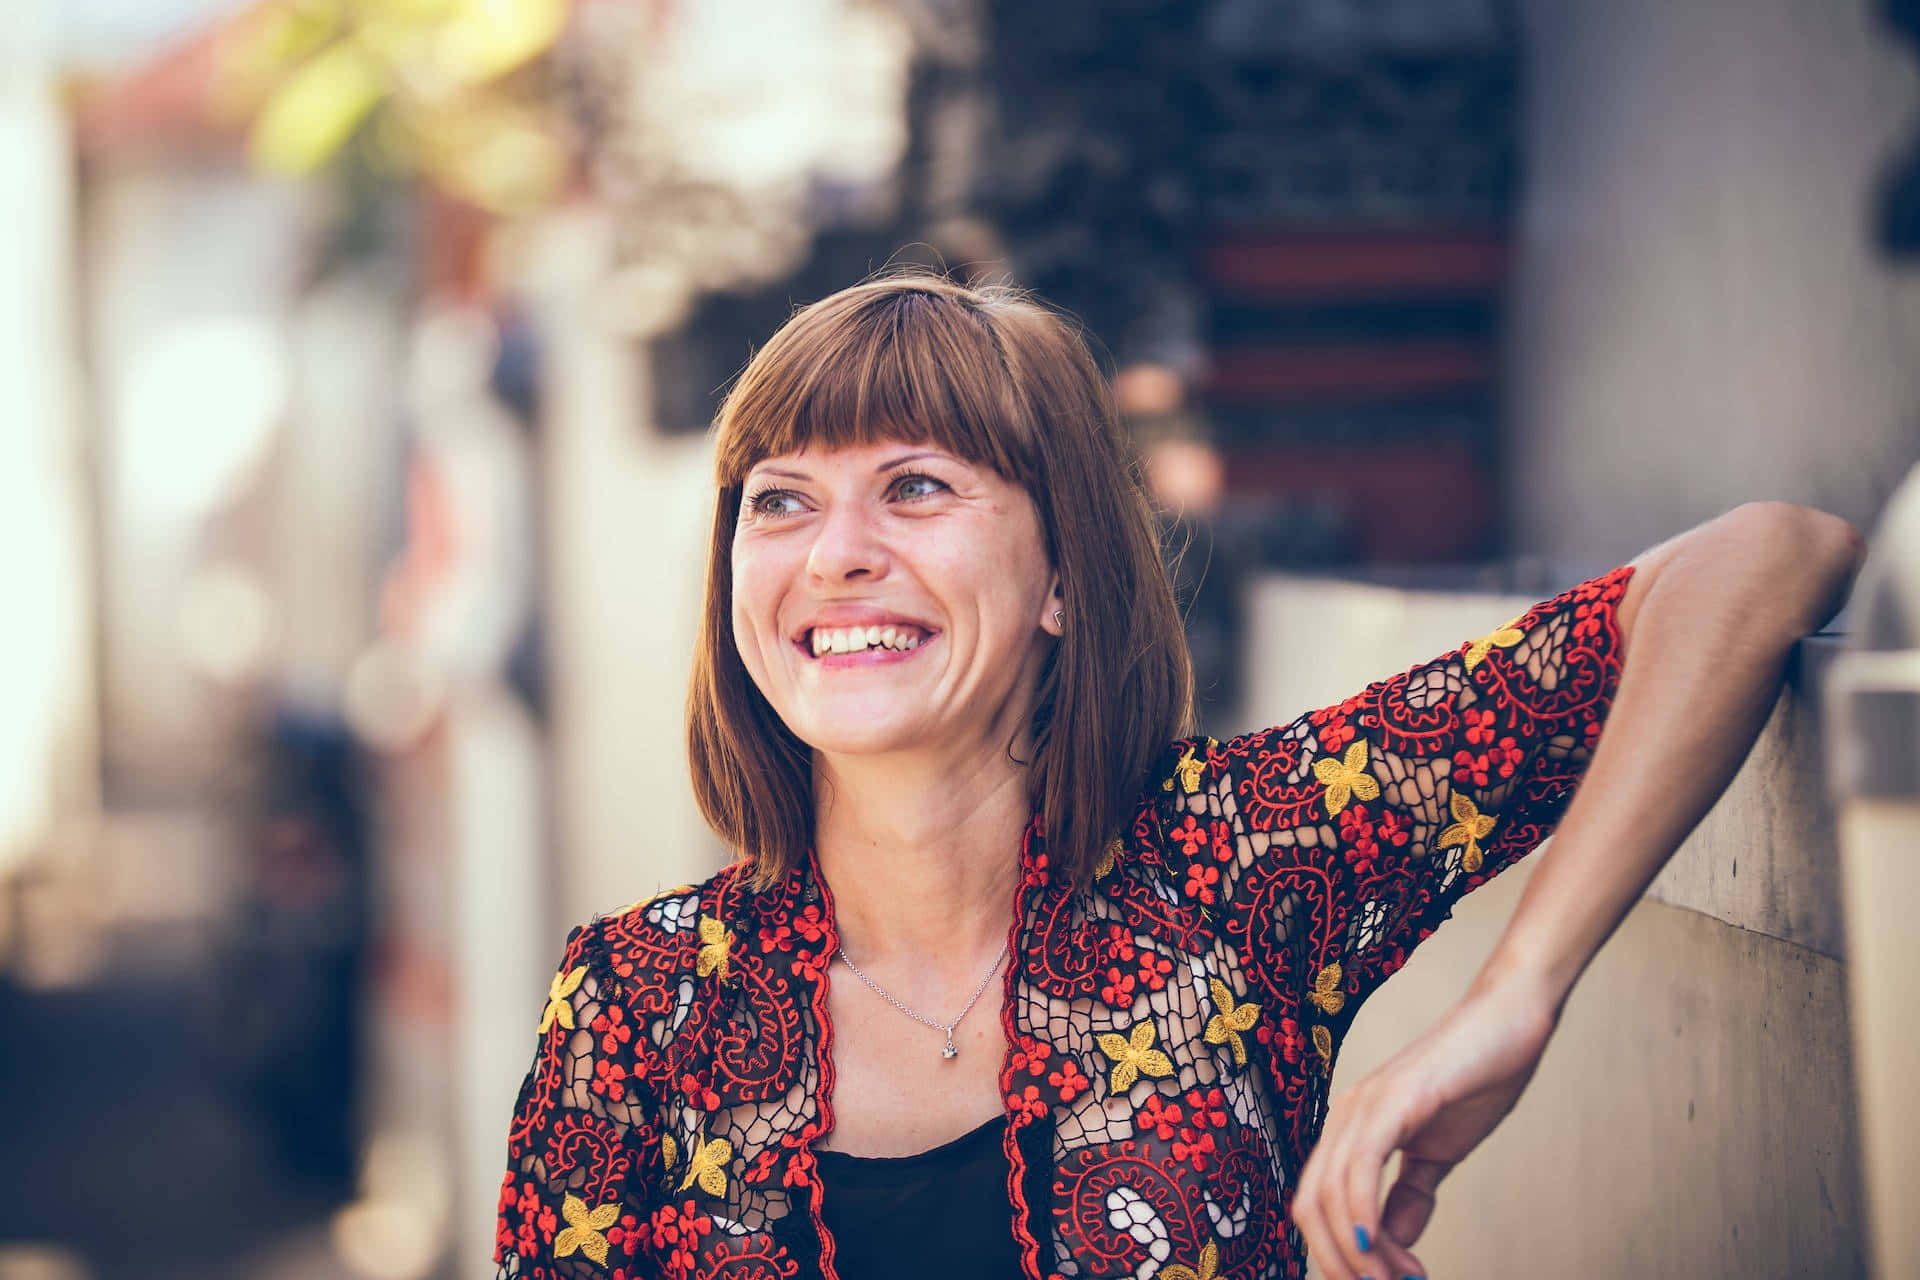 Middle Aged Woman With Bangs Smile Background